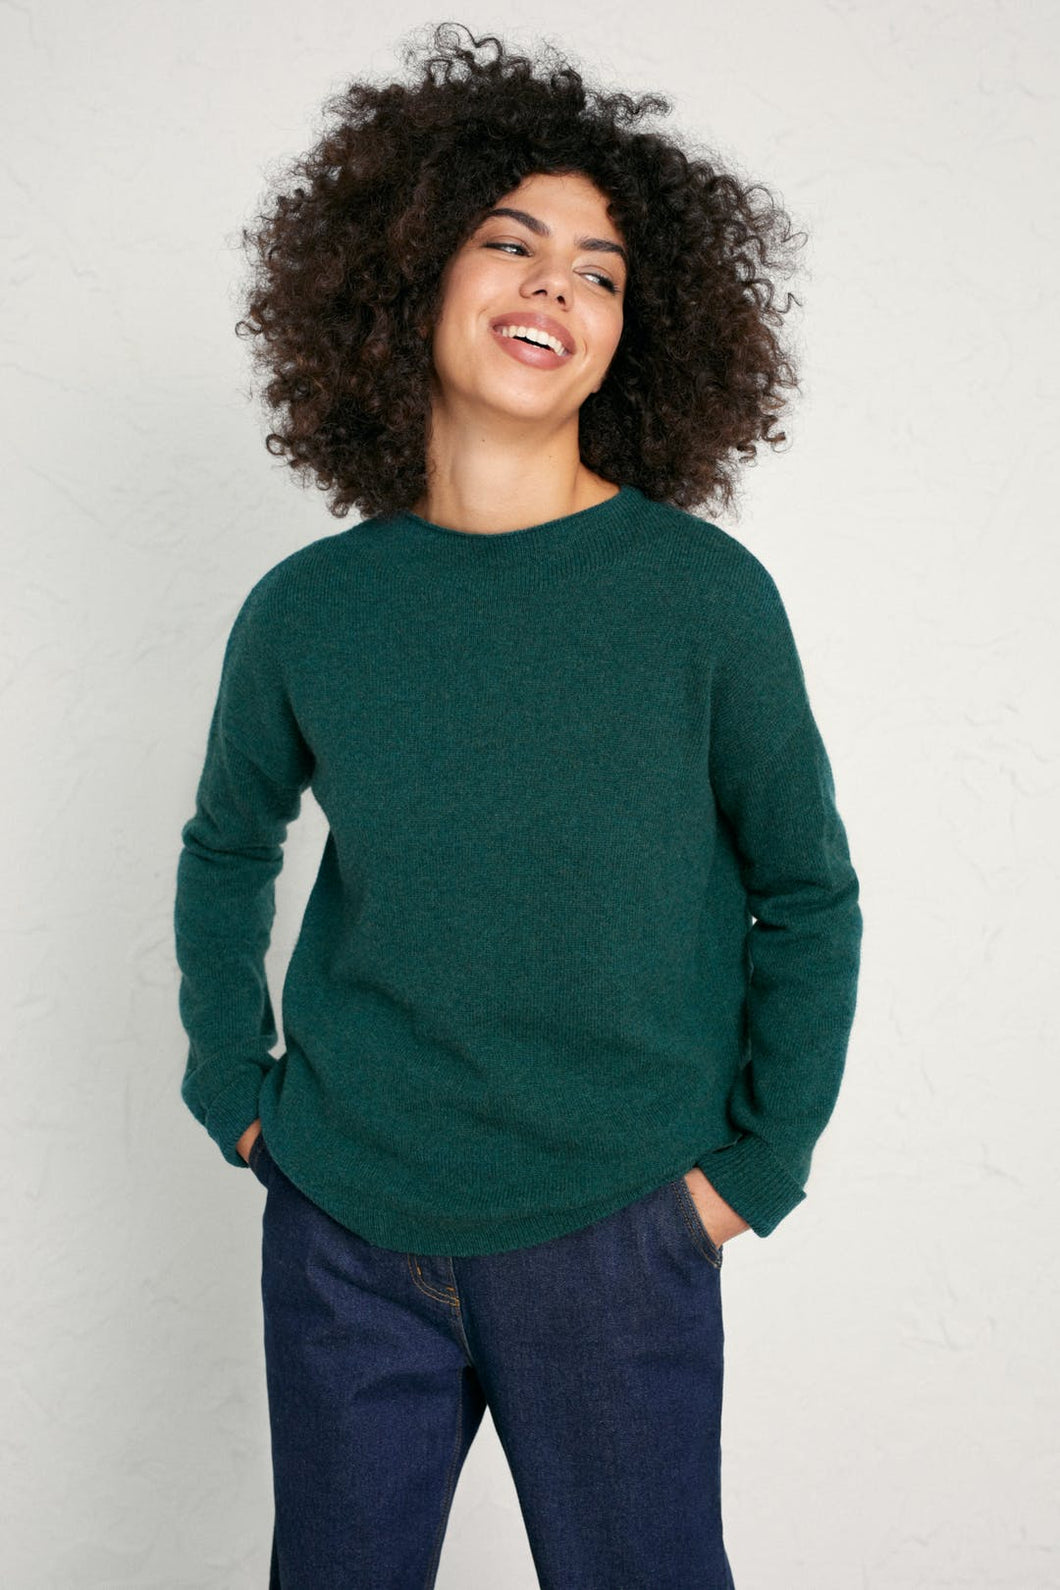 seasalt Shillings grown on neck loose fit jumper in Thicket